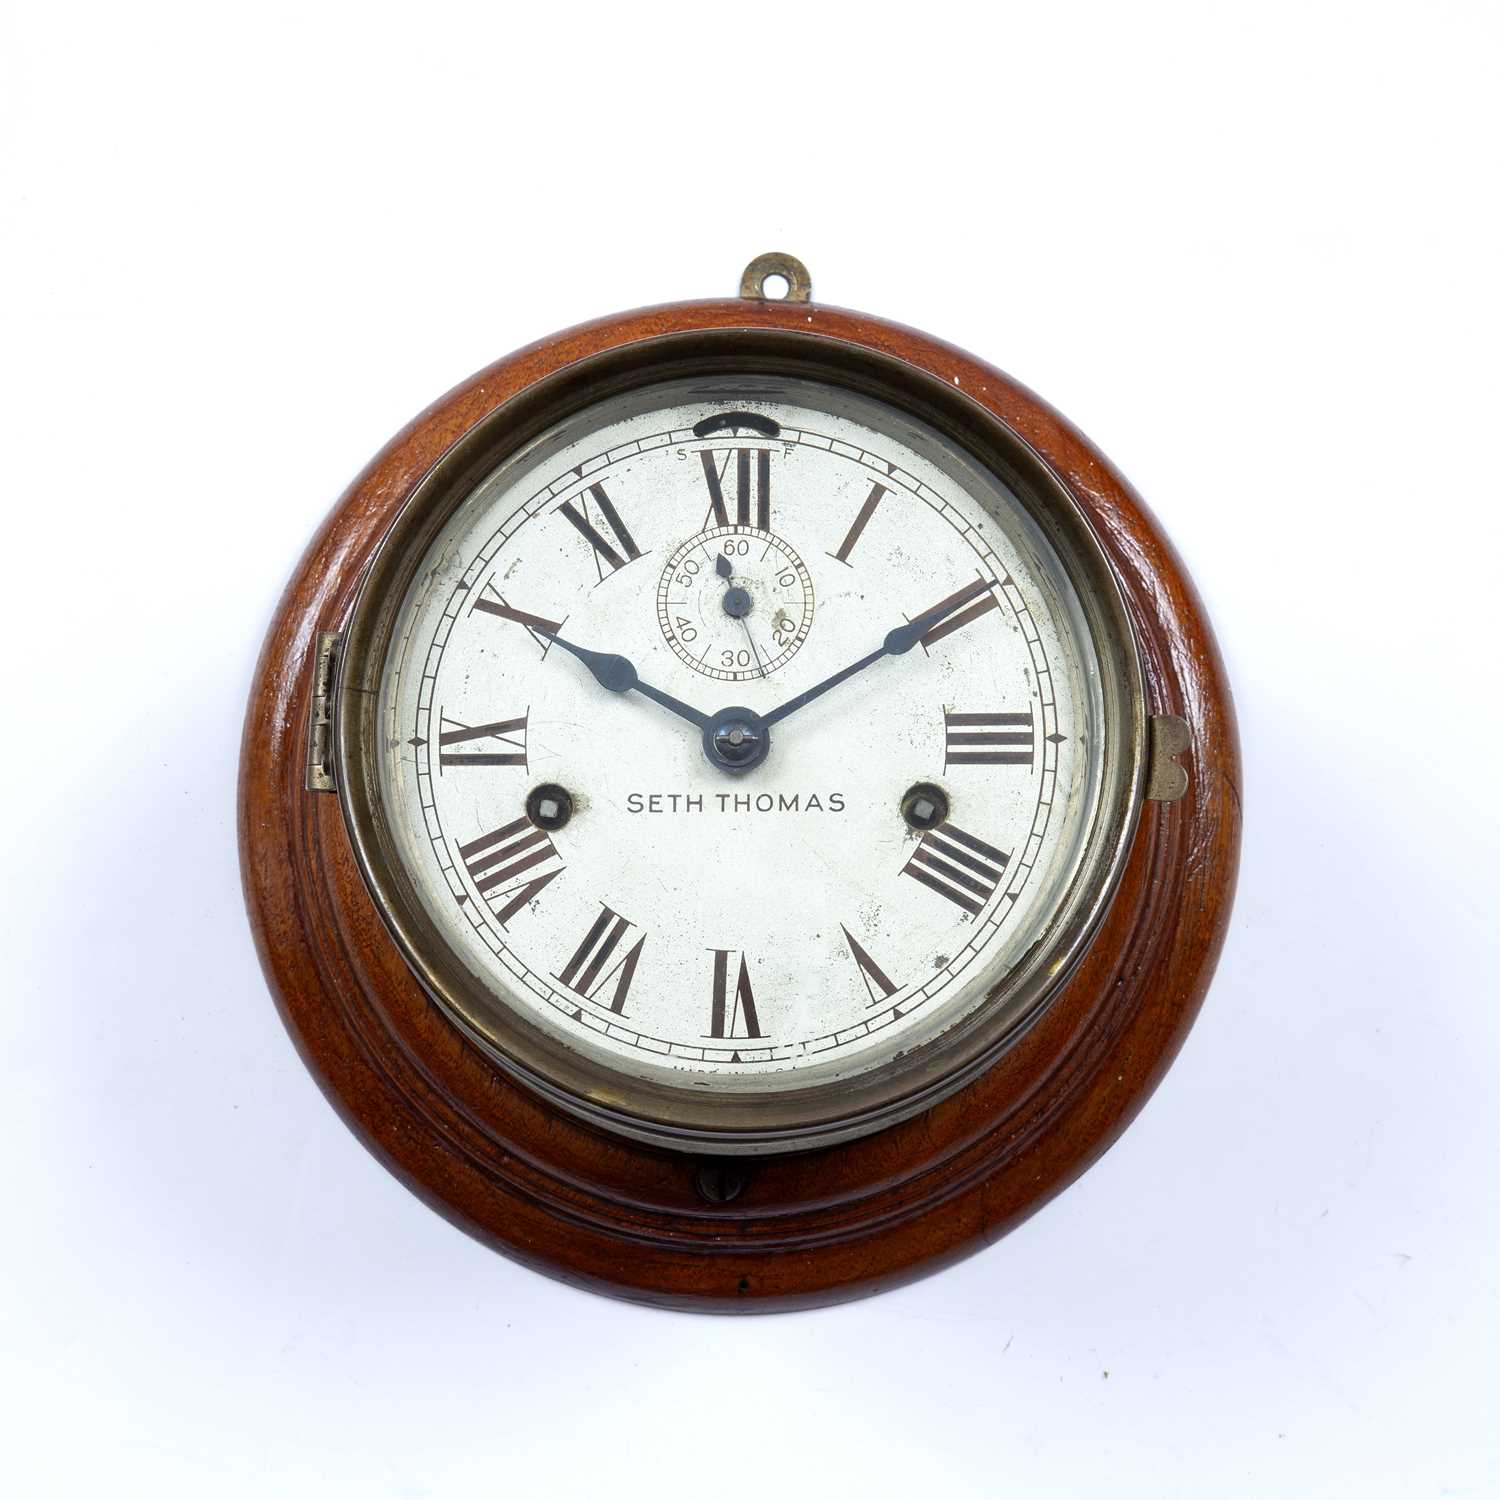 A late 19th century American nickel plated brass ship's clock, by Seth Thomas, the silvered dial